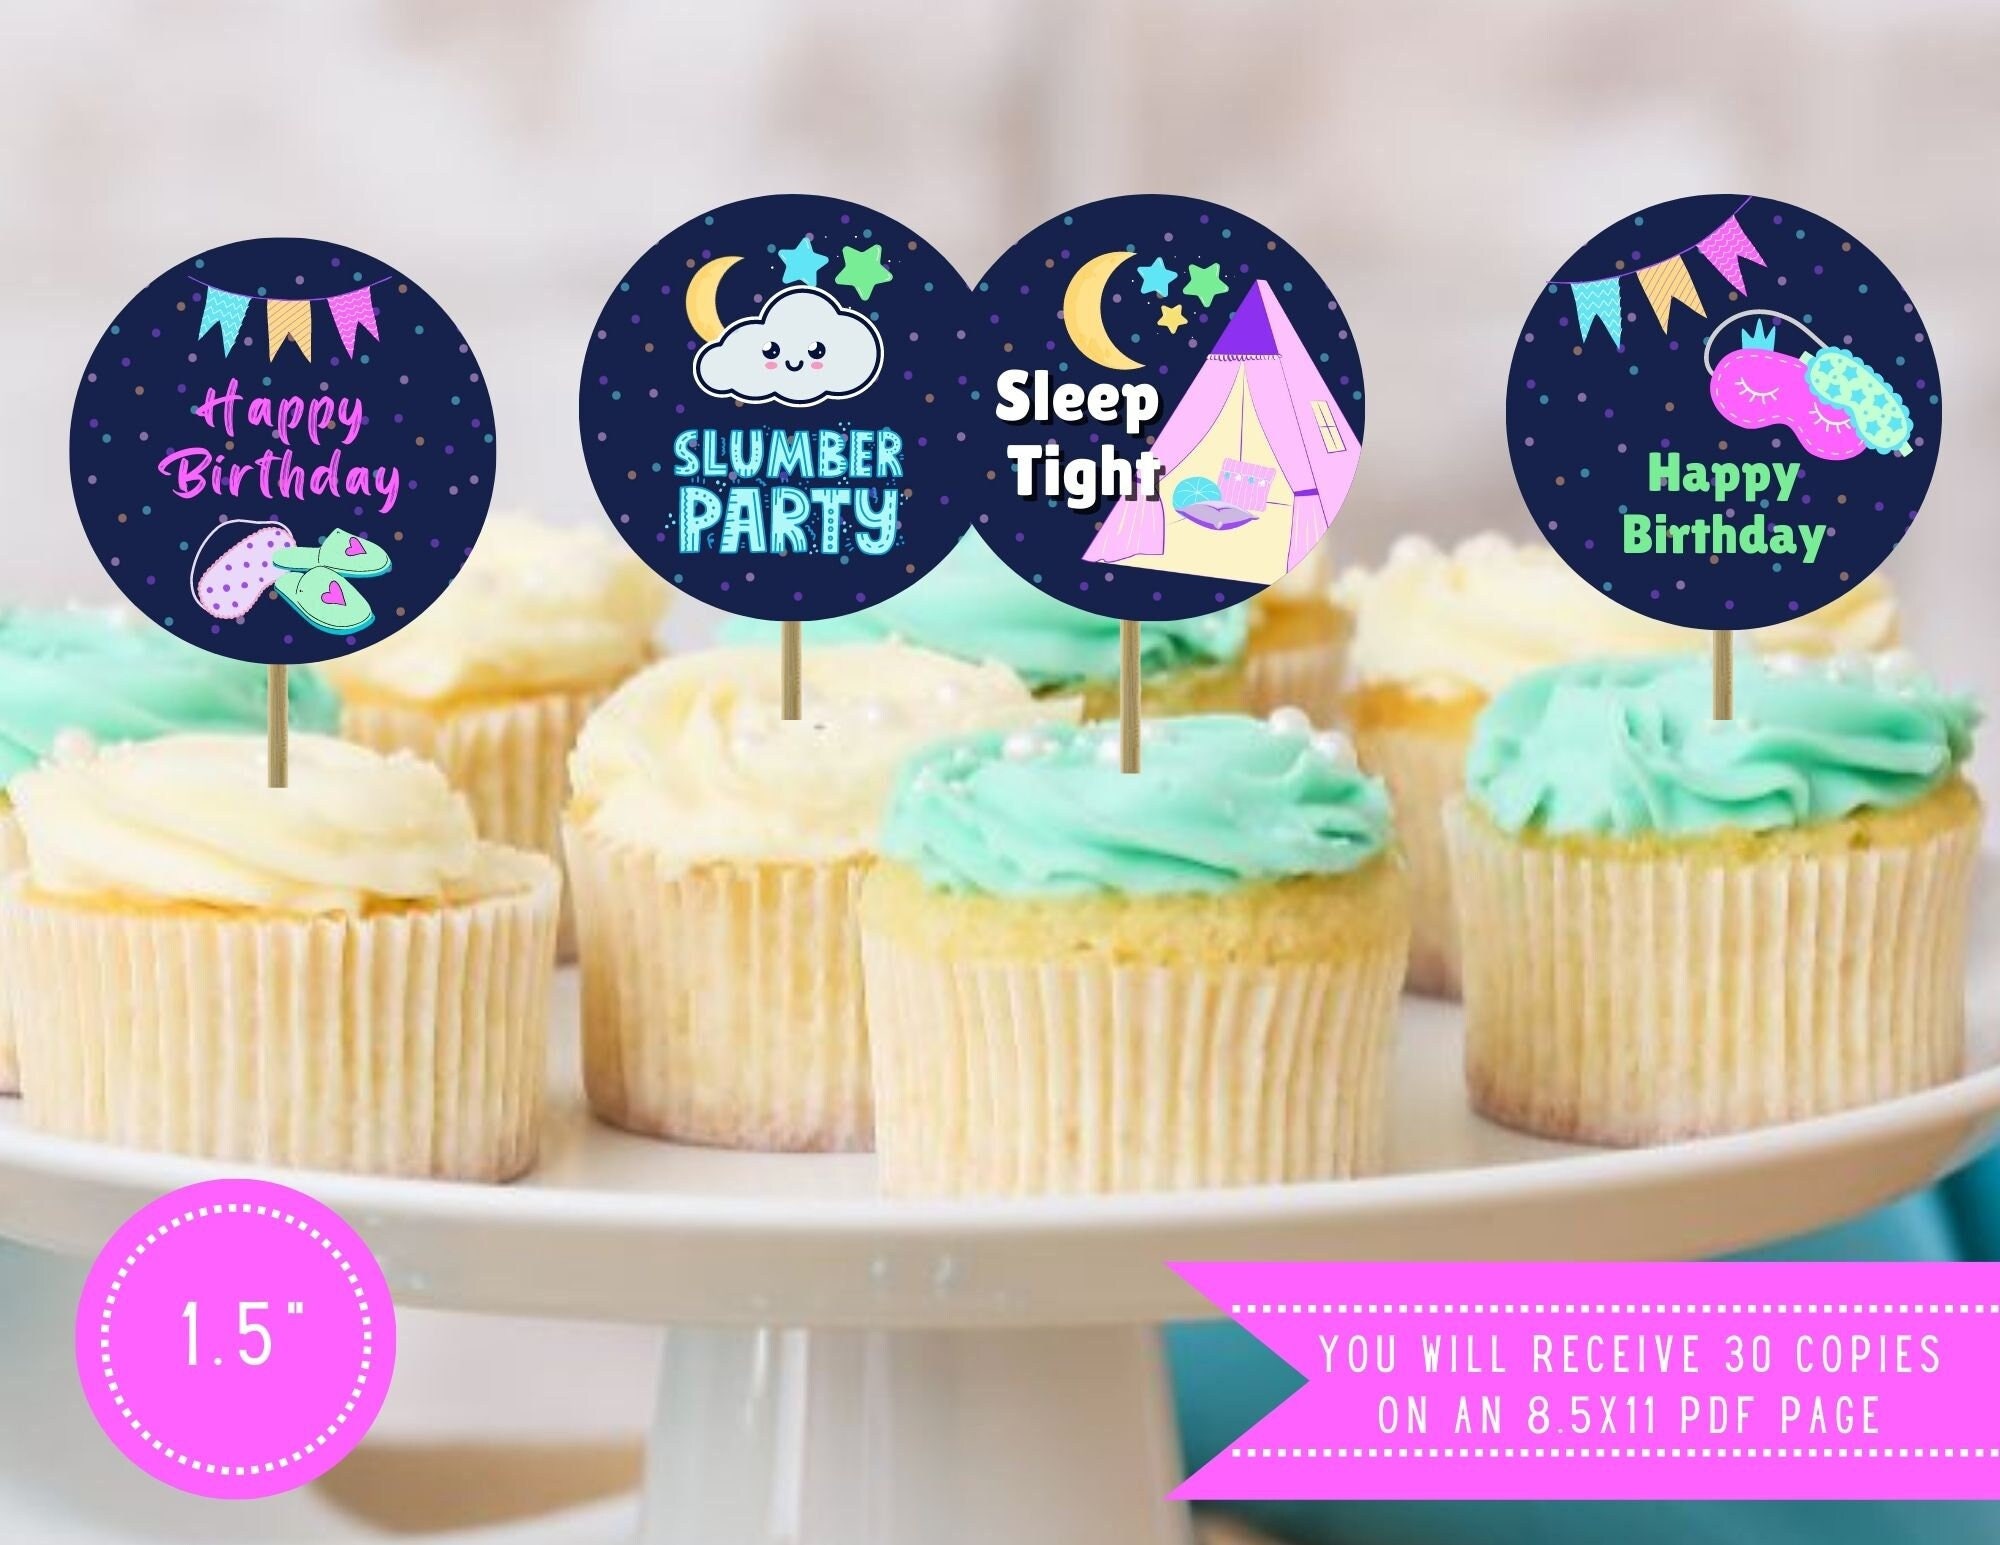 Fondant Sleepover Slumber Party Toppers for Cupcakes, Cookies or